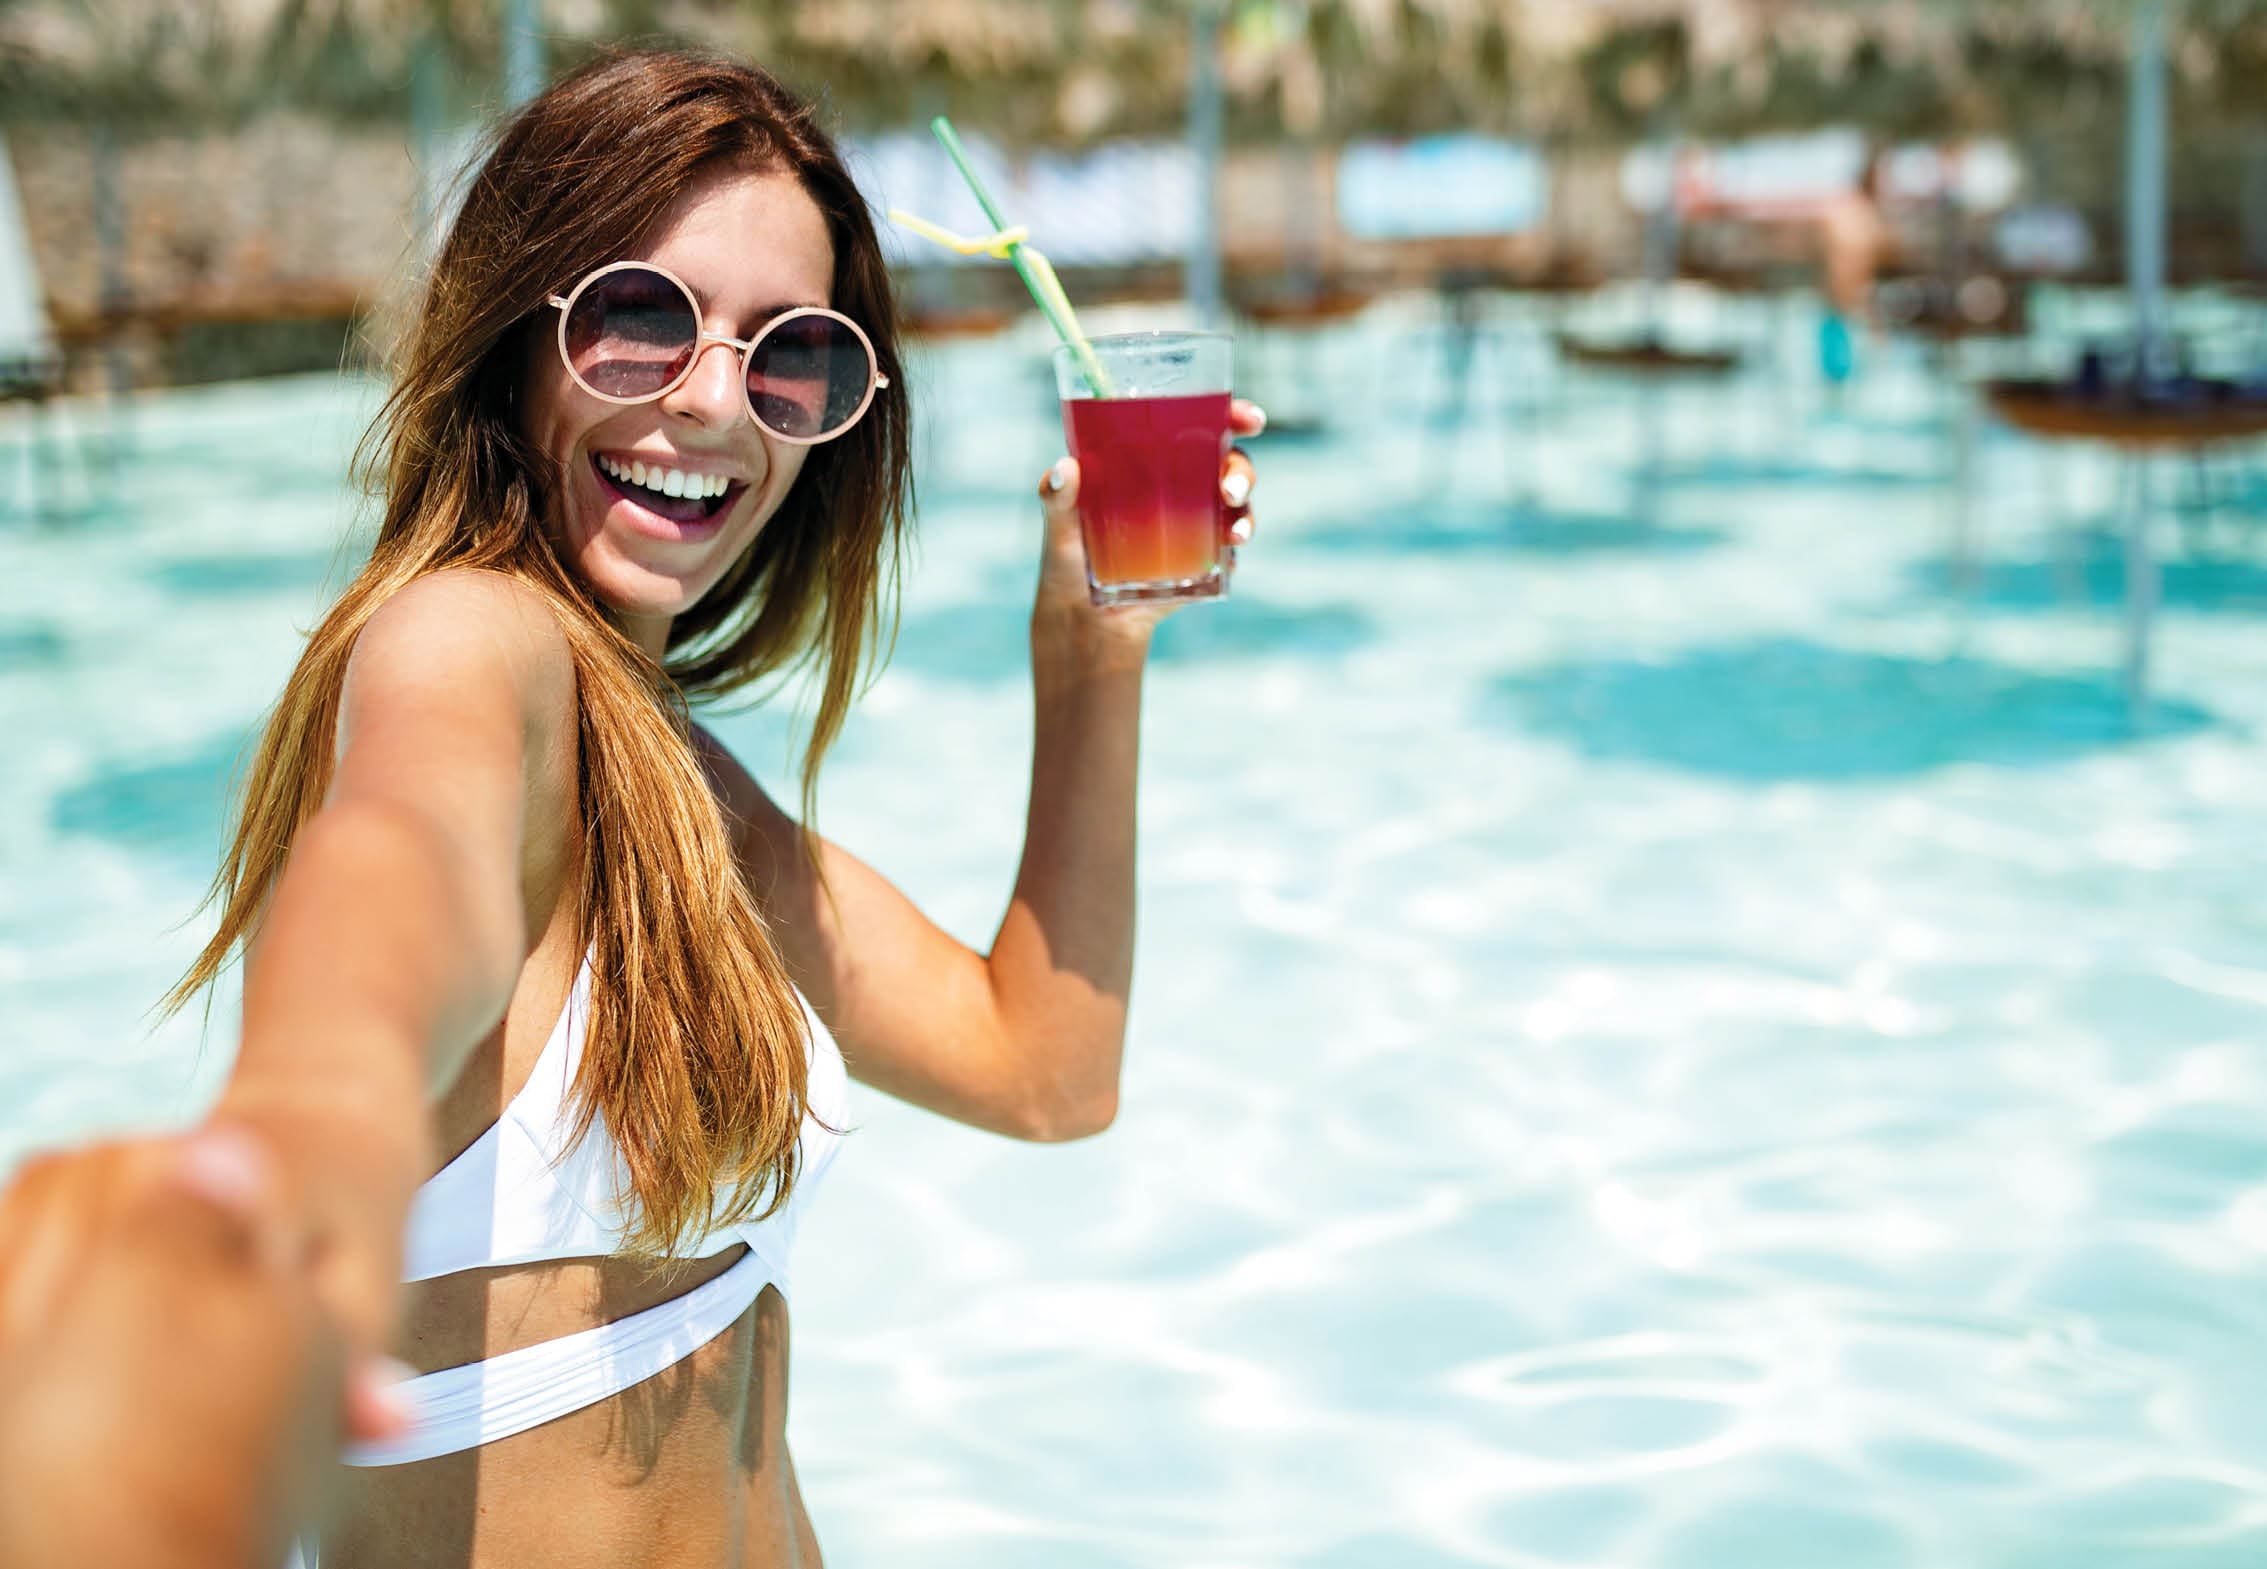 Summer vacation portrait of young woman having fun and smiling on the beach in bikini with cocktail